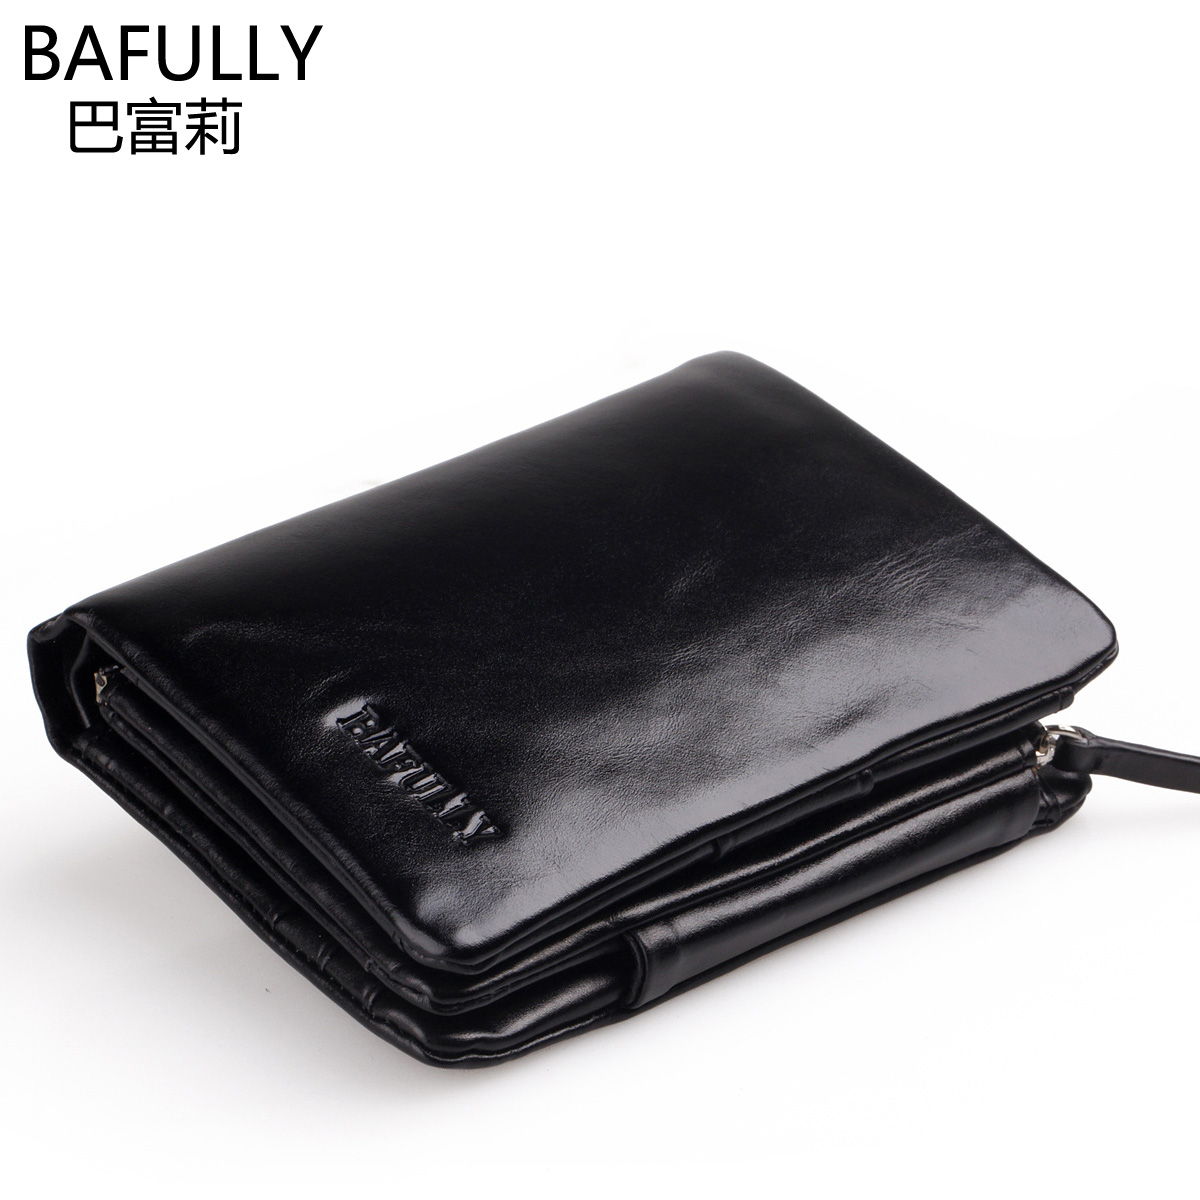 2014 fashion men  Bafully first layer of cowhide leather wallet genuine male short design wallet  three fold wallet